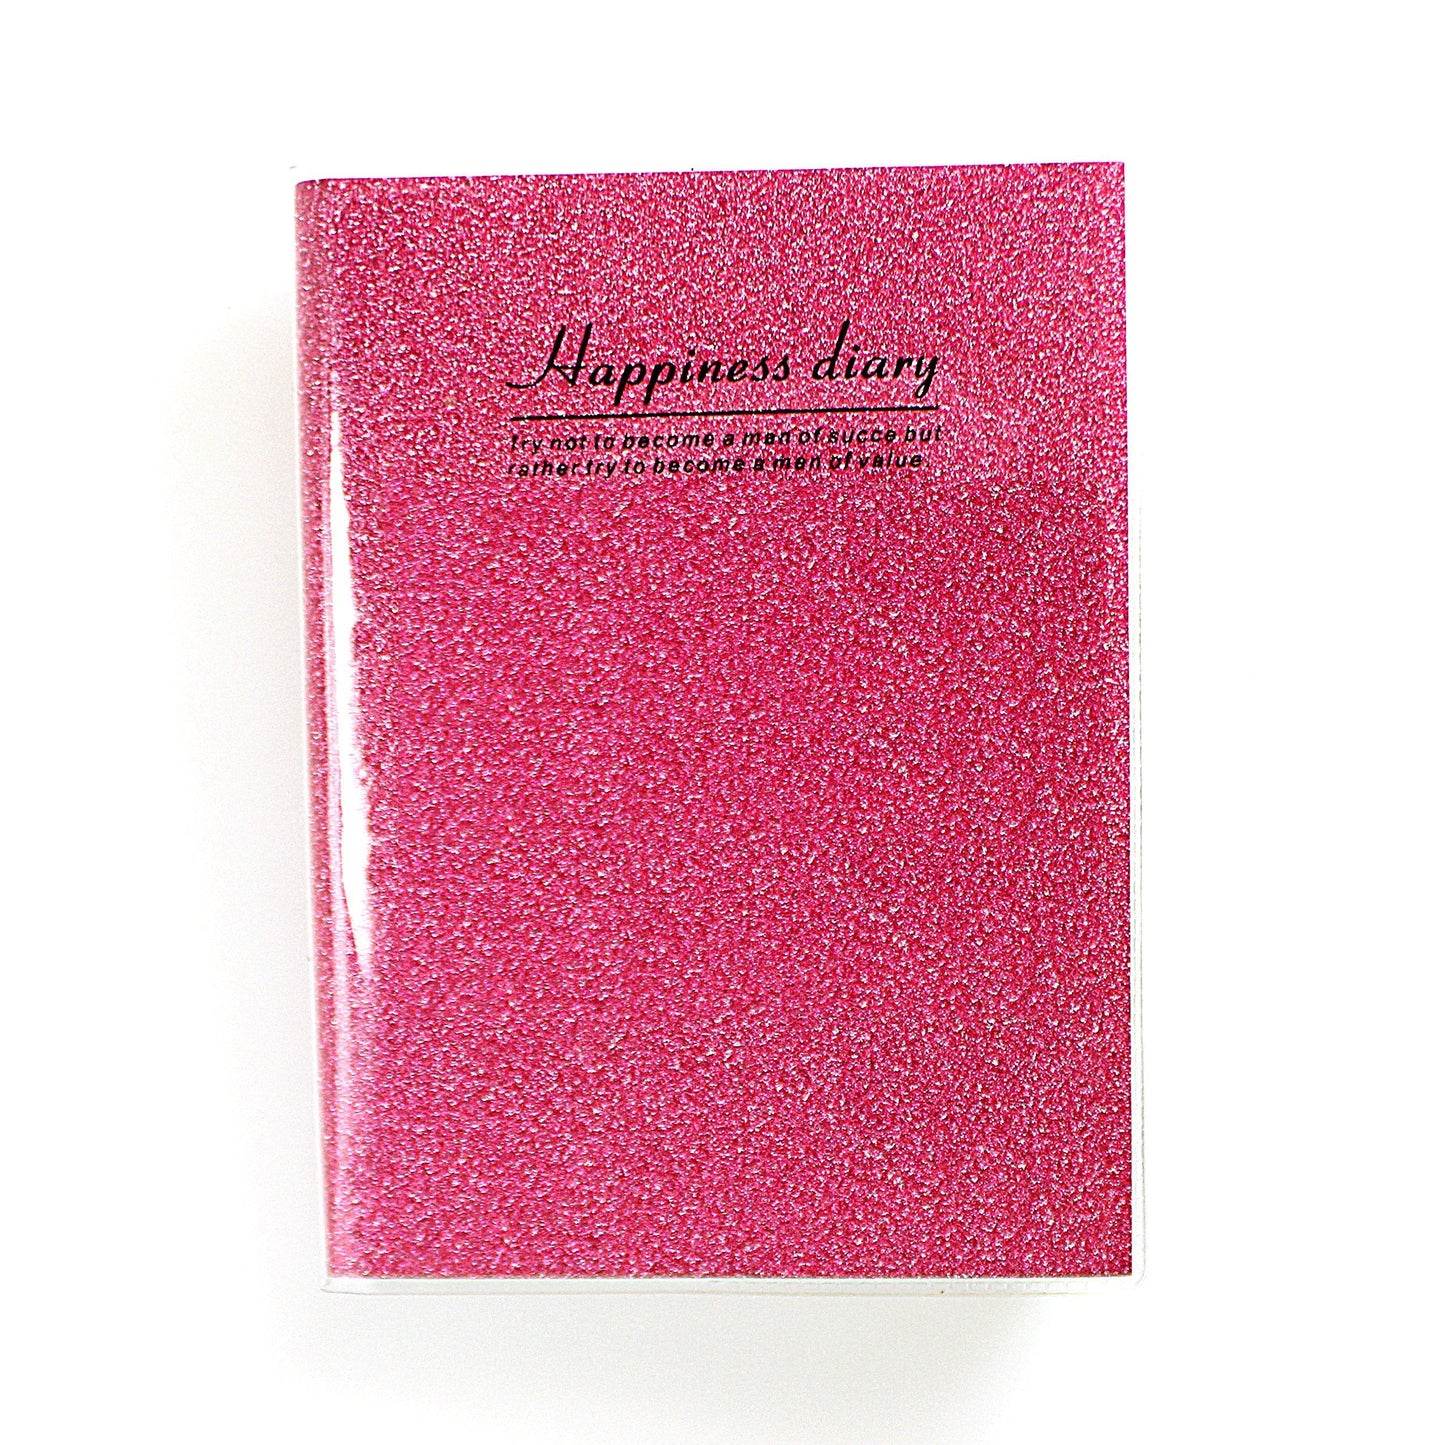 Happiness Diary Notebook 21 x 15 cm Assorted Colours 3259 (Large Letter Rate)